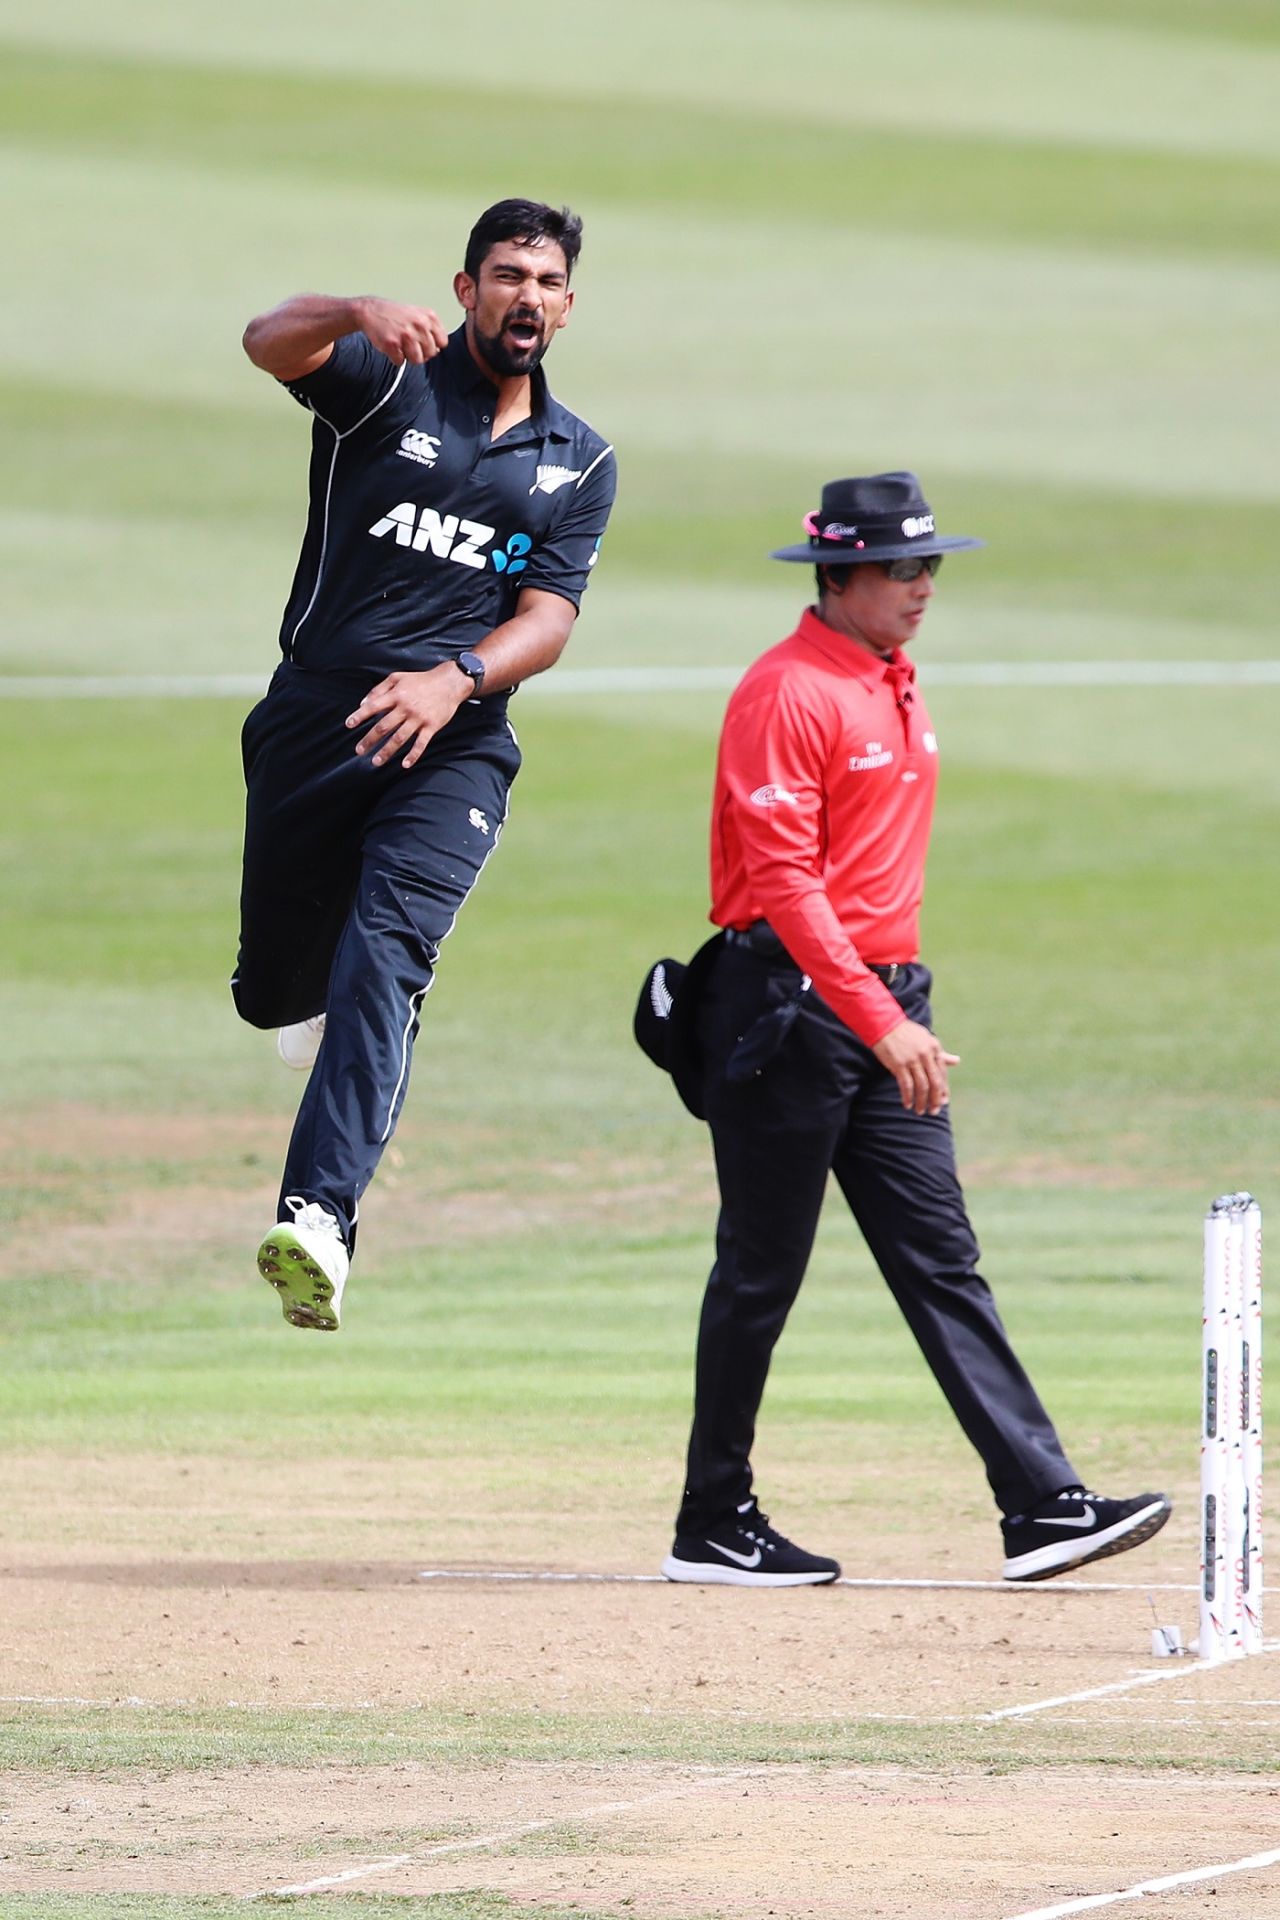 Ish Sodhi is elated after picking up a wicket, New Zealand v England, 1st ODI, Hamilton, 25 February, 2018